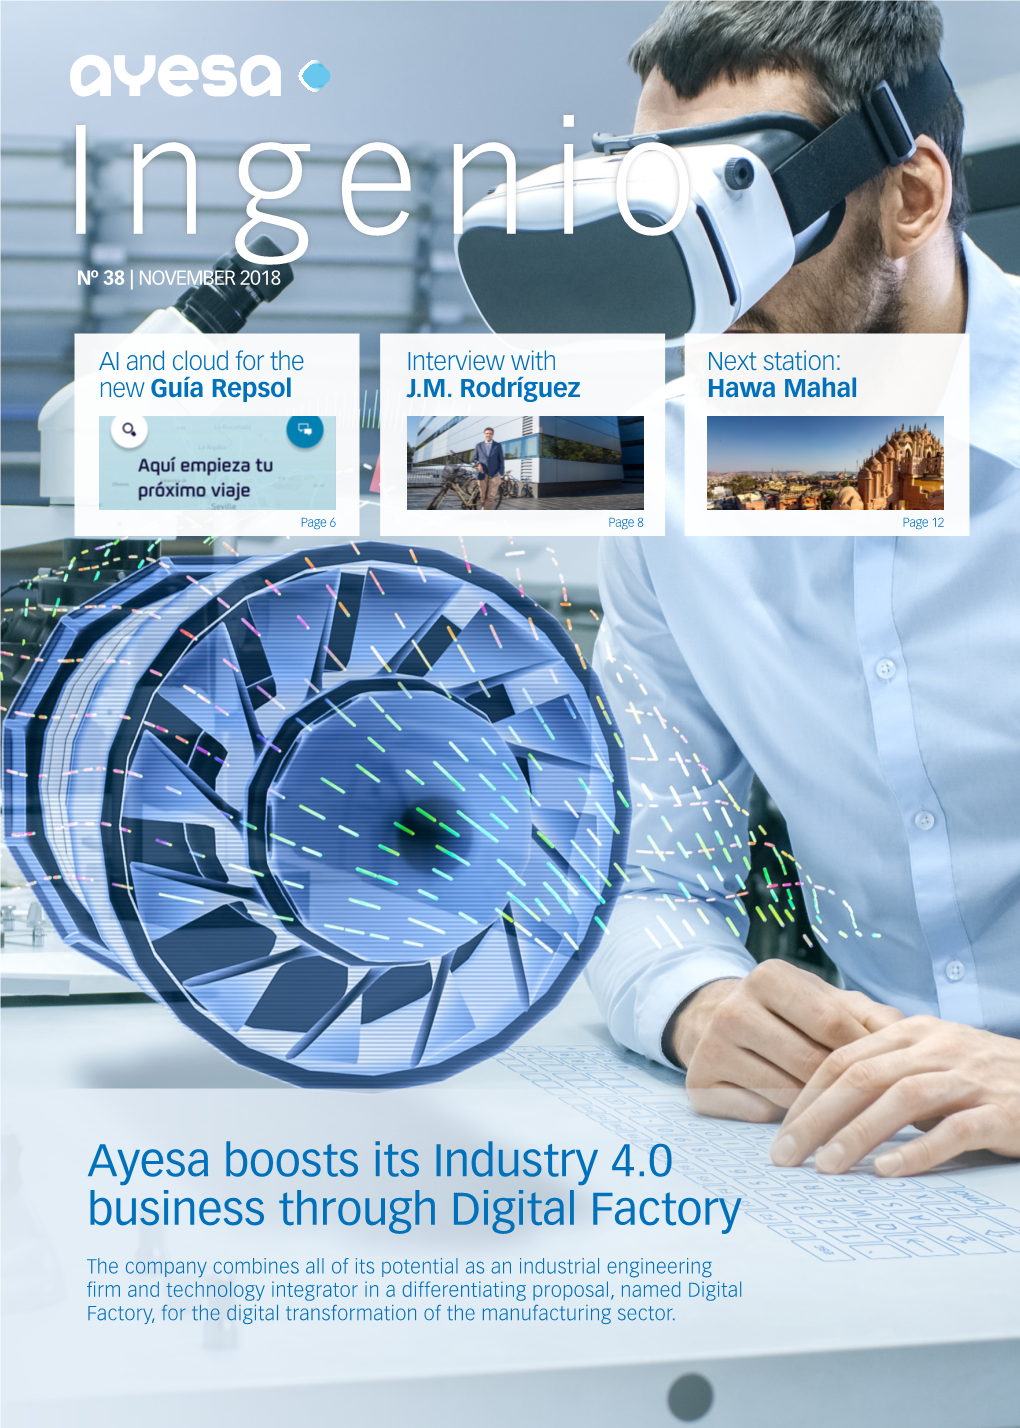 Ayesa Boosts Its Industry 4.0 Business Through Digital Factory